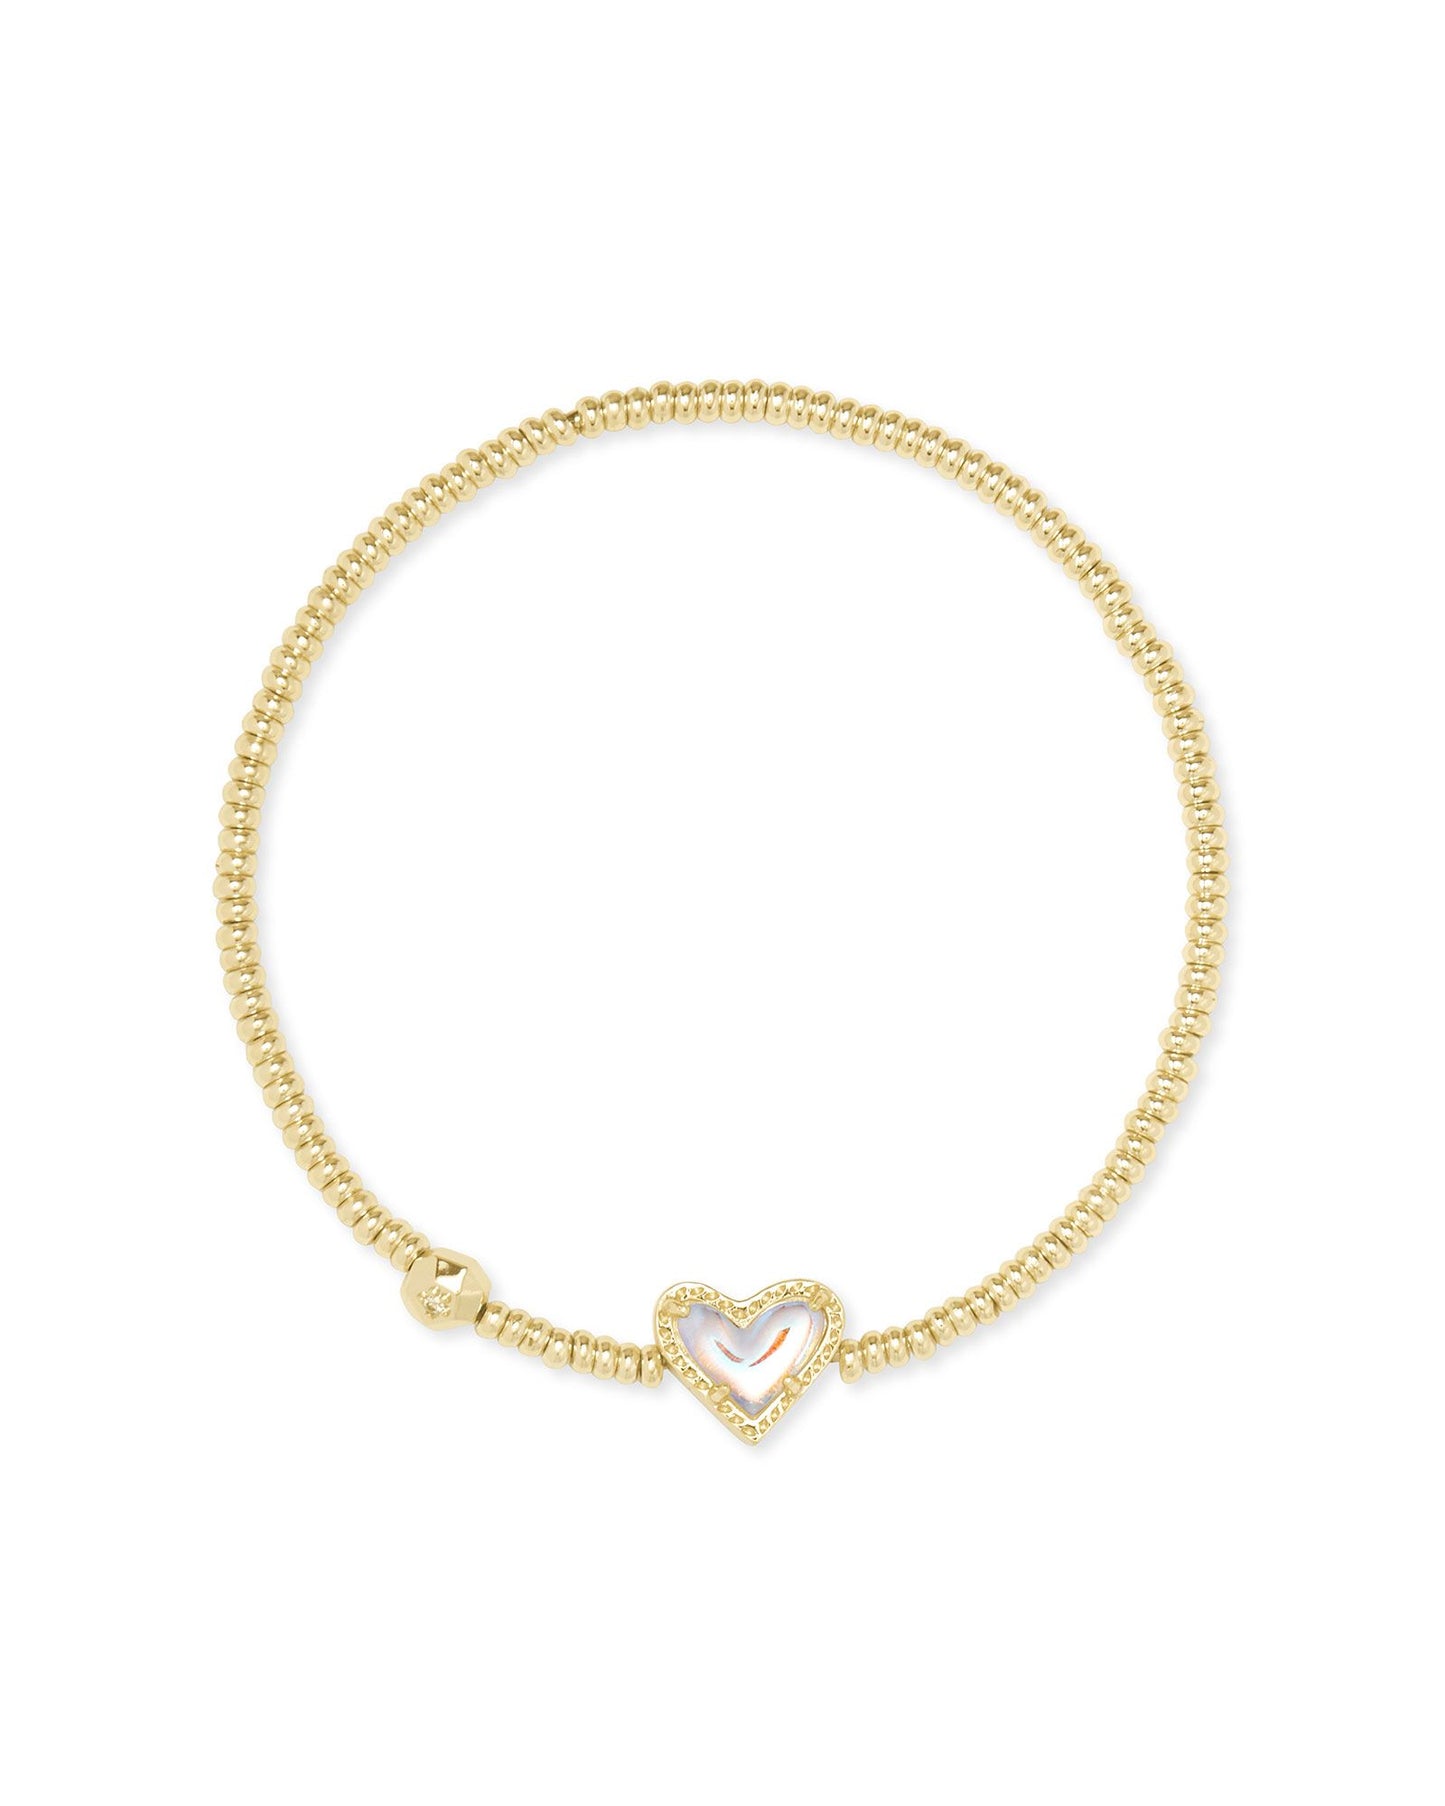 Like wearing your heart on your sleeve? Then the Ari Gold Heart Stretch Bracelet is perfect for you. Designed to fit any wrist, this minimal-yet-playful bracelet is the easiest way to bring some love and shine to your everyday stacks. Gold Ivory Mother of Pearl